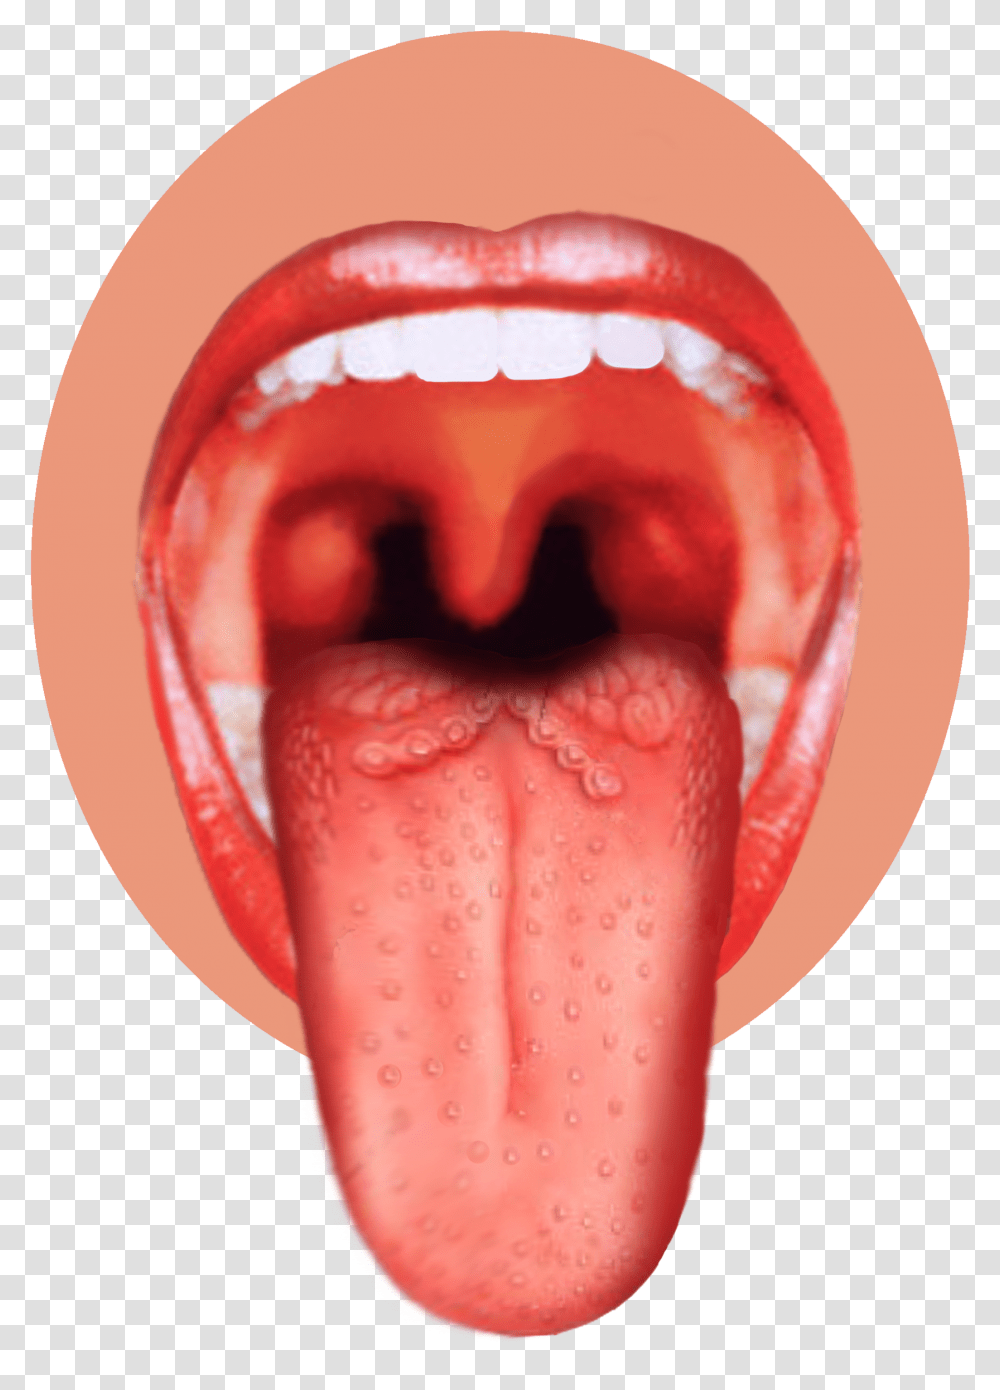 Human Tongue Image Taste Buds On Tongue, Mouth, Lip Transparent Png